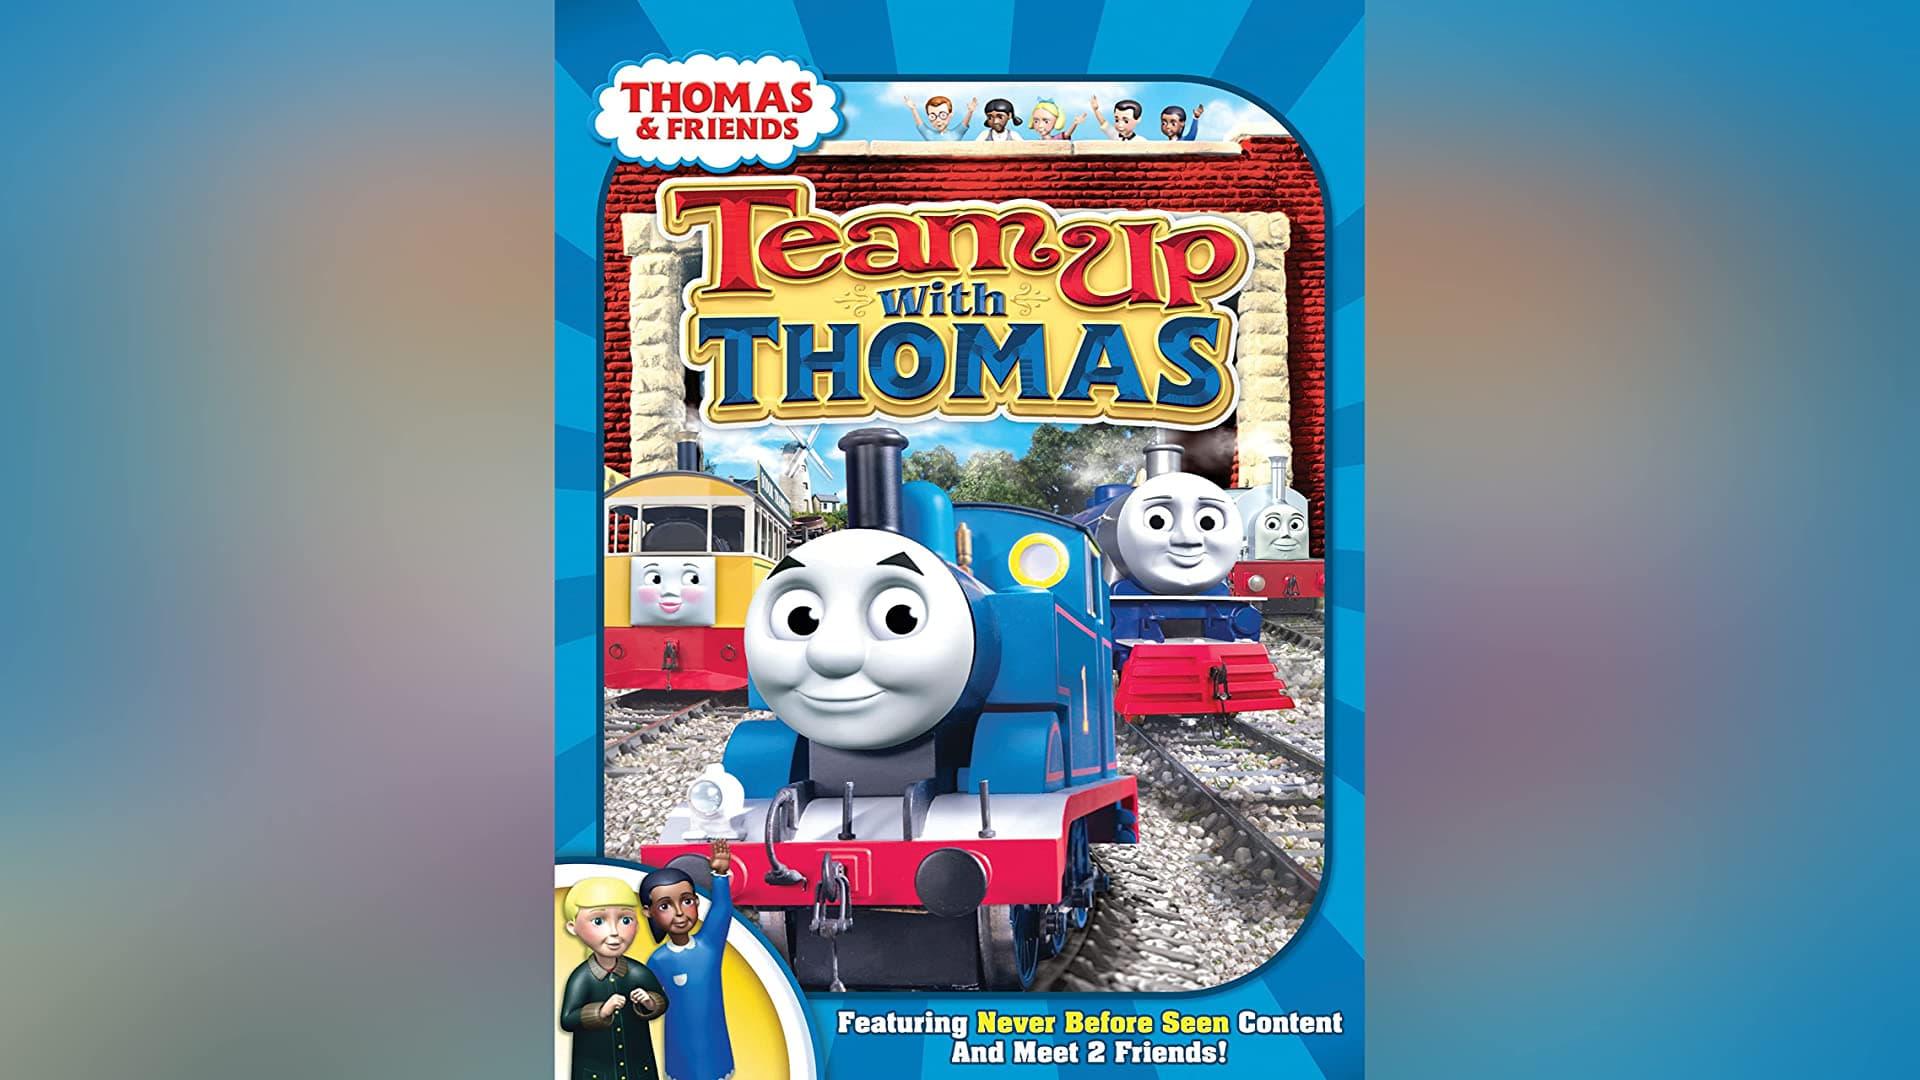 Thomas & Friends: Team Up with Thomas backdrop